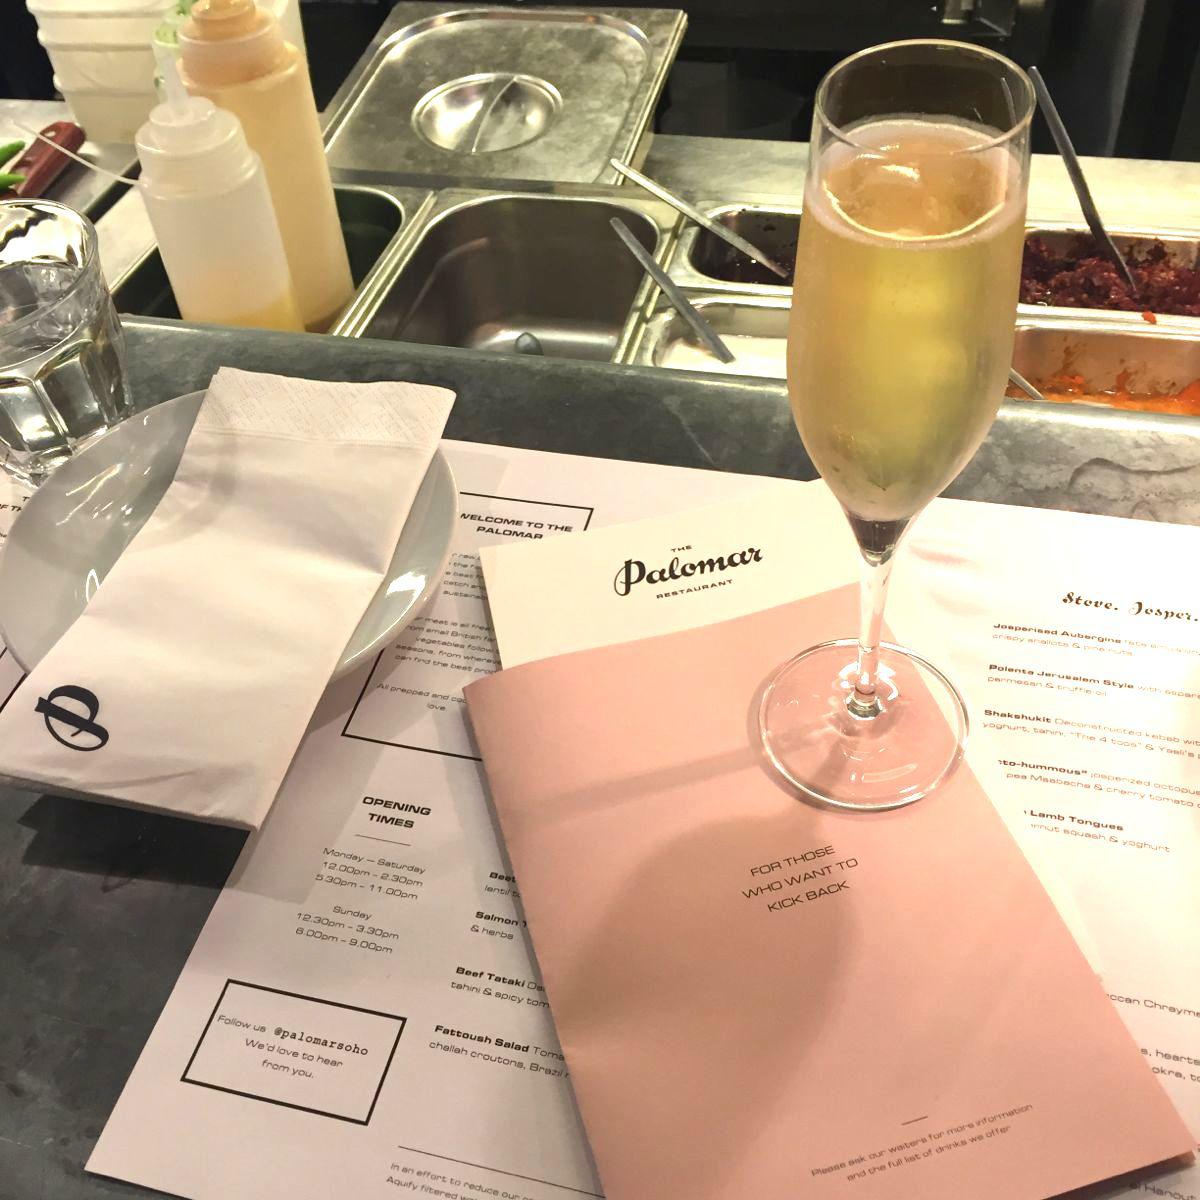 Tickled tastebuds at The Palomar | Travel with Penelope & Parker